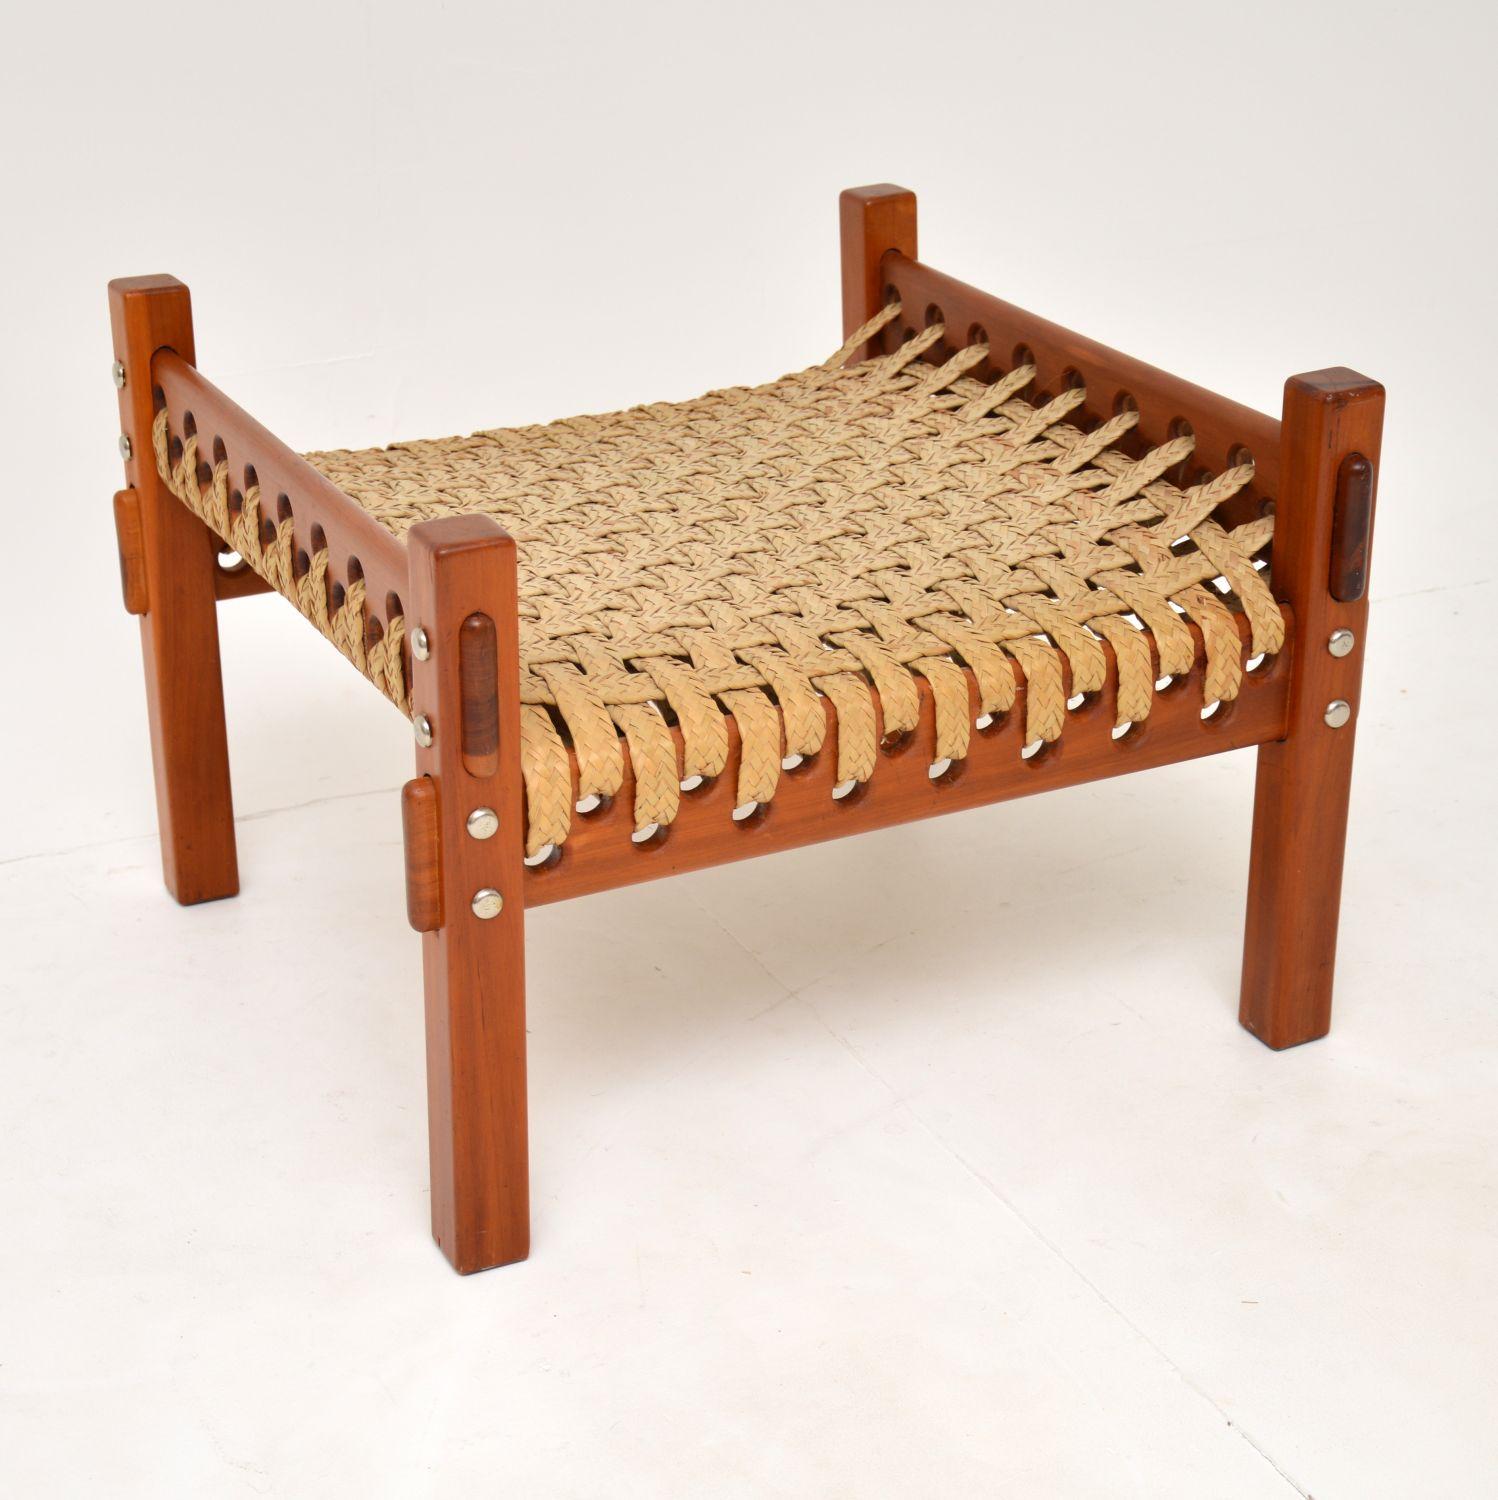 A beautiful and unusual vintage stool, most likely made in Brazil and dating from the 1960-1970’s.

This has a fantastic design,it is a very quirky and striking item. The seat is beautifully woven with broad flat cord, and the frame is well made